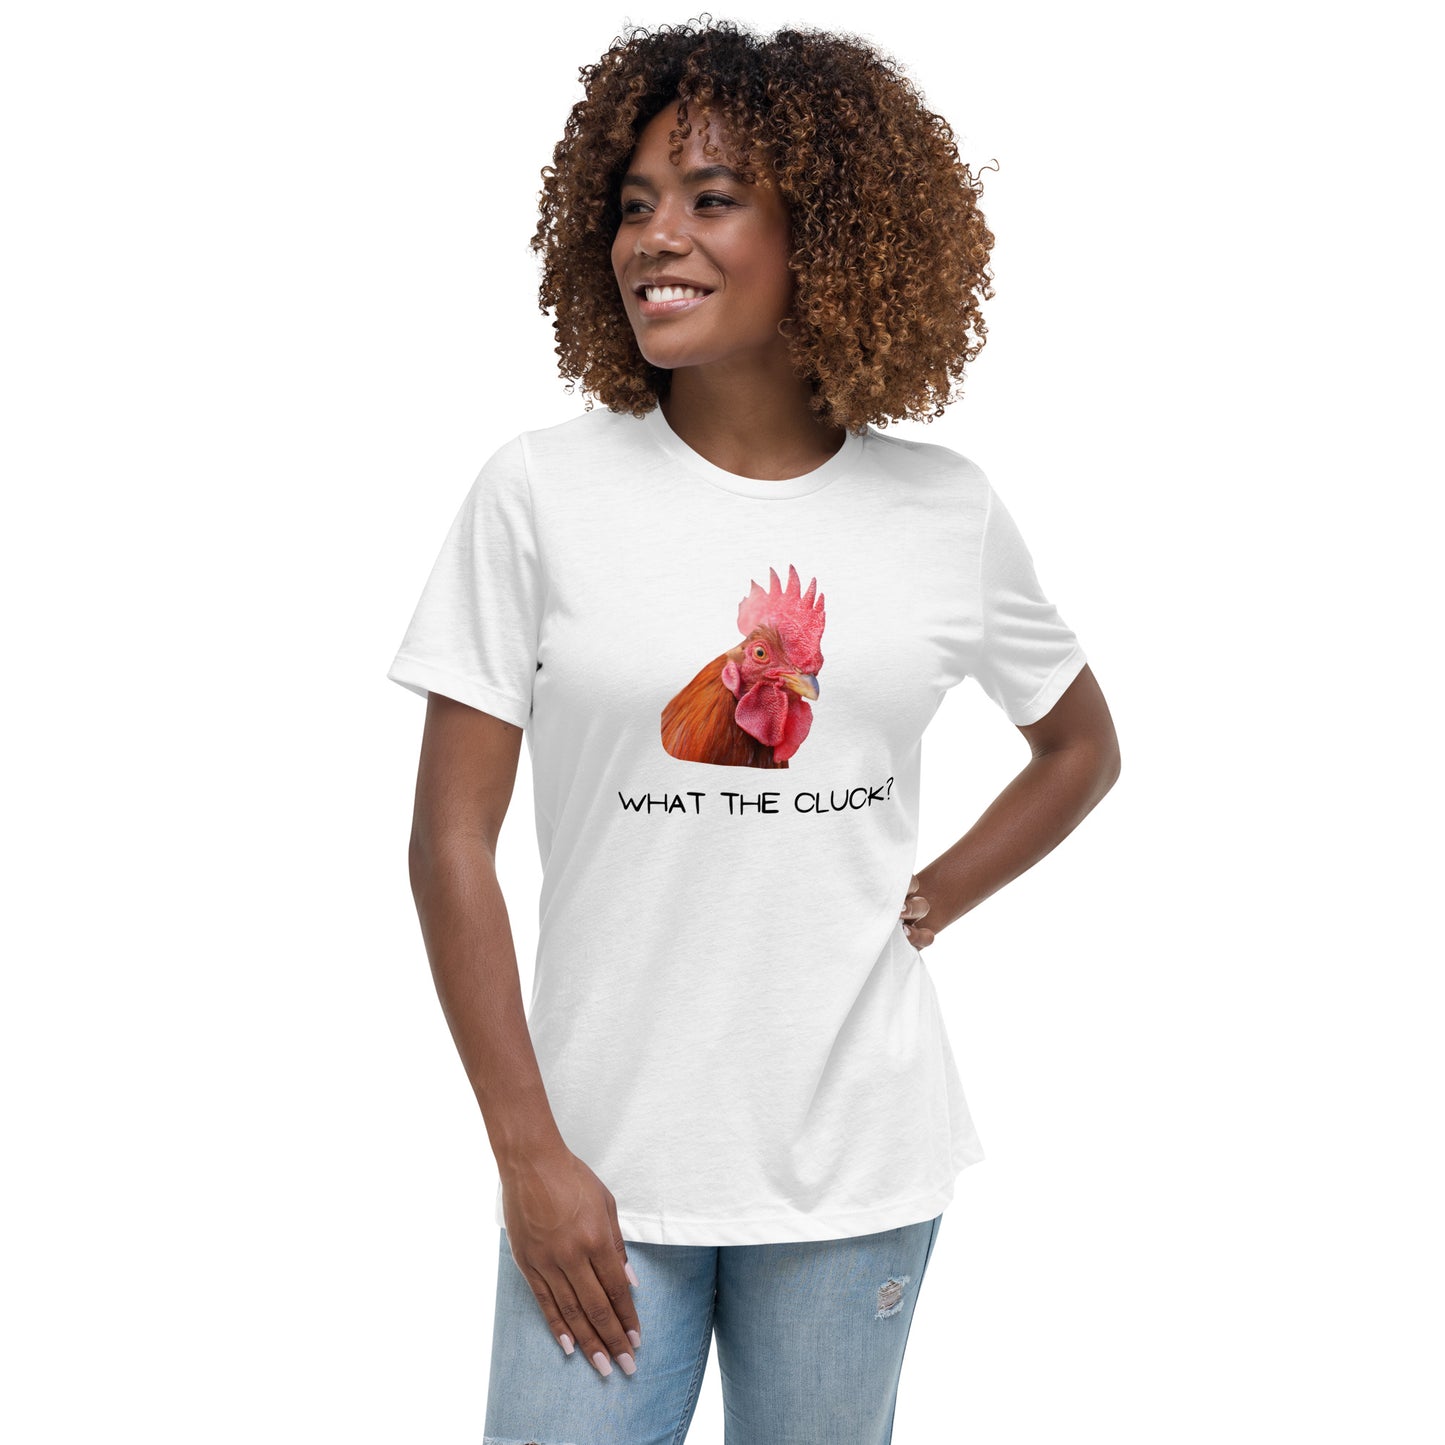 What the Cluck - Woman's T-Shirt